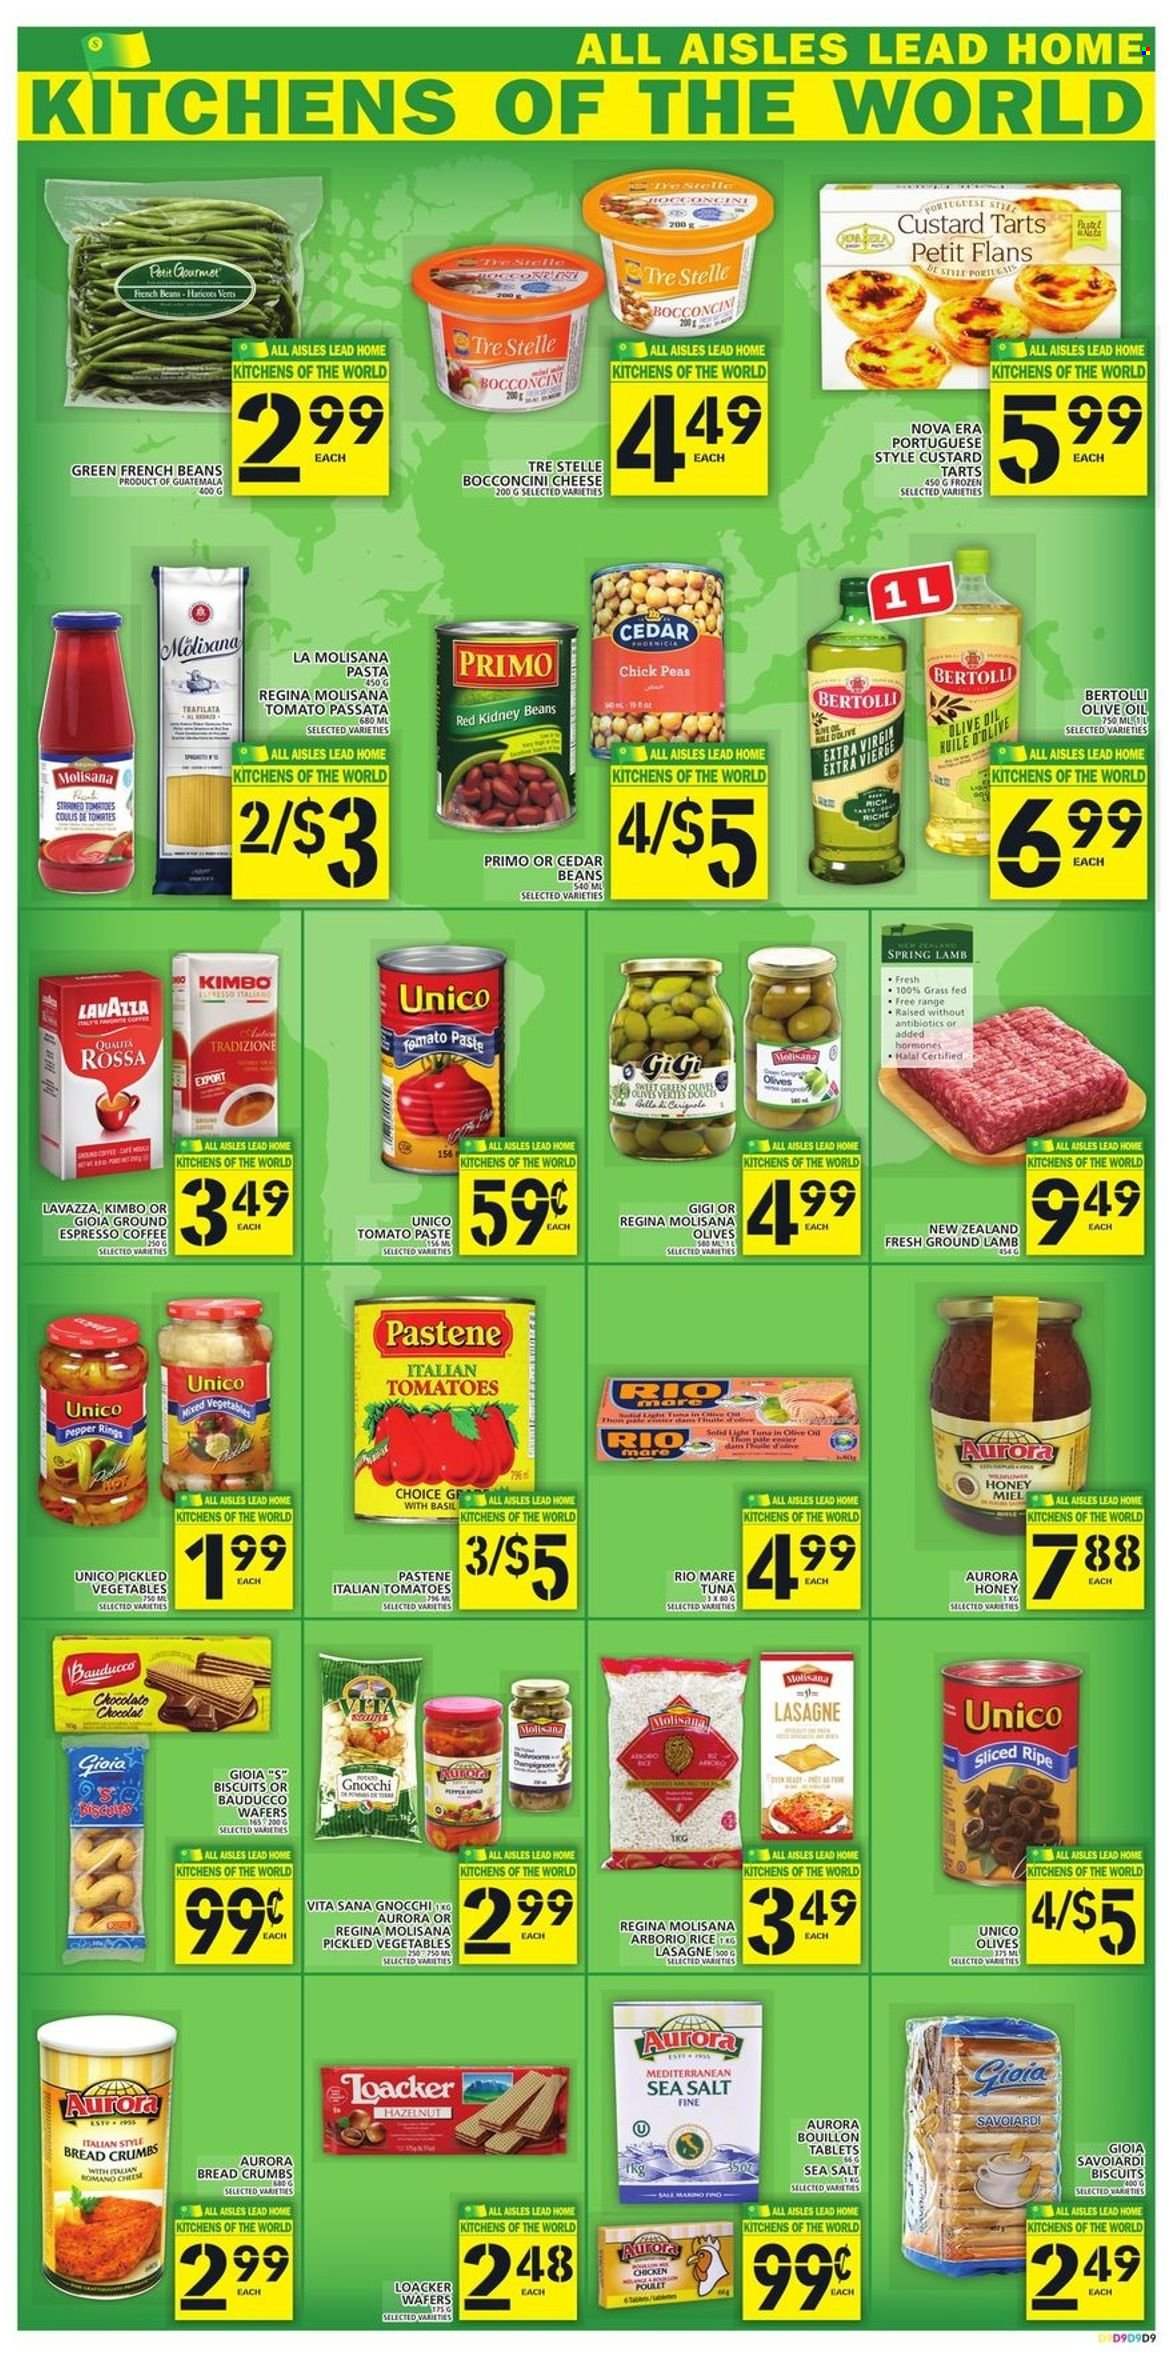 thumbnail - Food Basics Flyer - January 13, 2022 - January 19, 2022 - Sales products - breadcrumbs, french beans, peas, tuna, pasta, Bertolli, bocconcini, cheese, custard, wafers, biscuit, bouillon, sea salt, tomato paste, tomato sauce, kidney beans, rice, esponja, pepper, honey, coffee, Lavazza, ground lamb, lamb meat, N All, gnocchi, olives. Page 10.